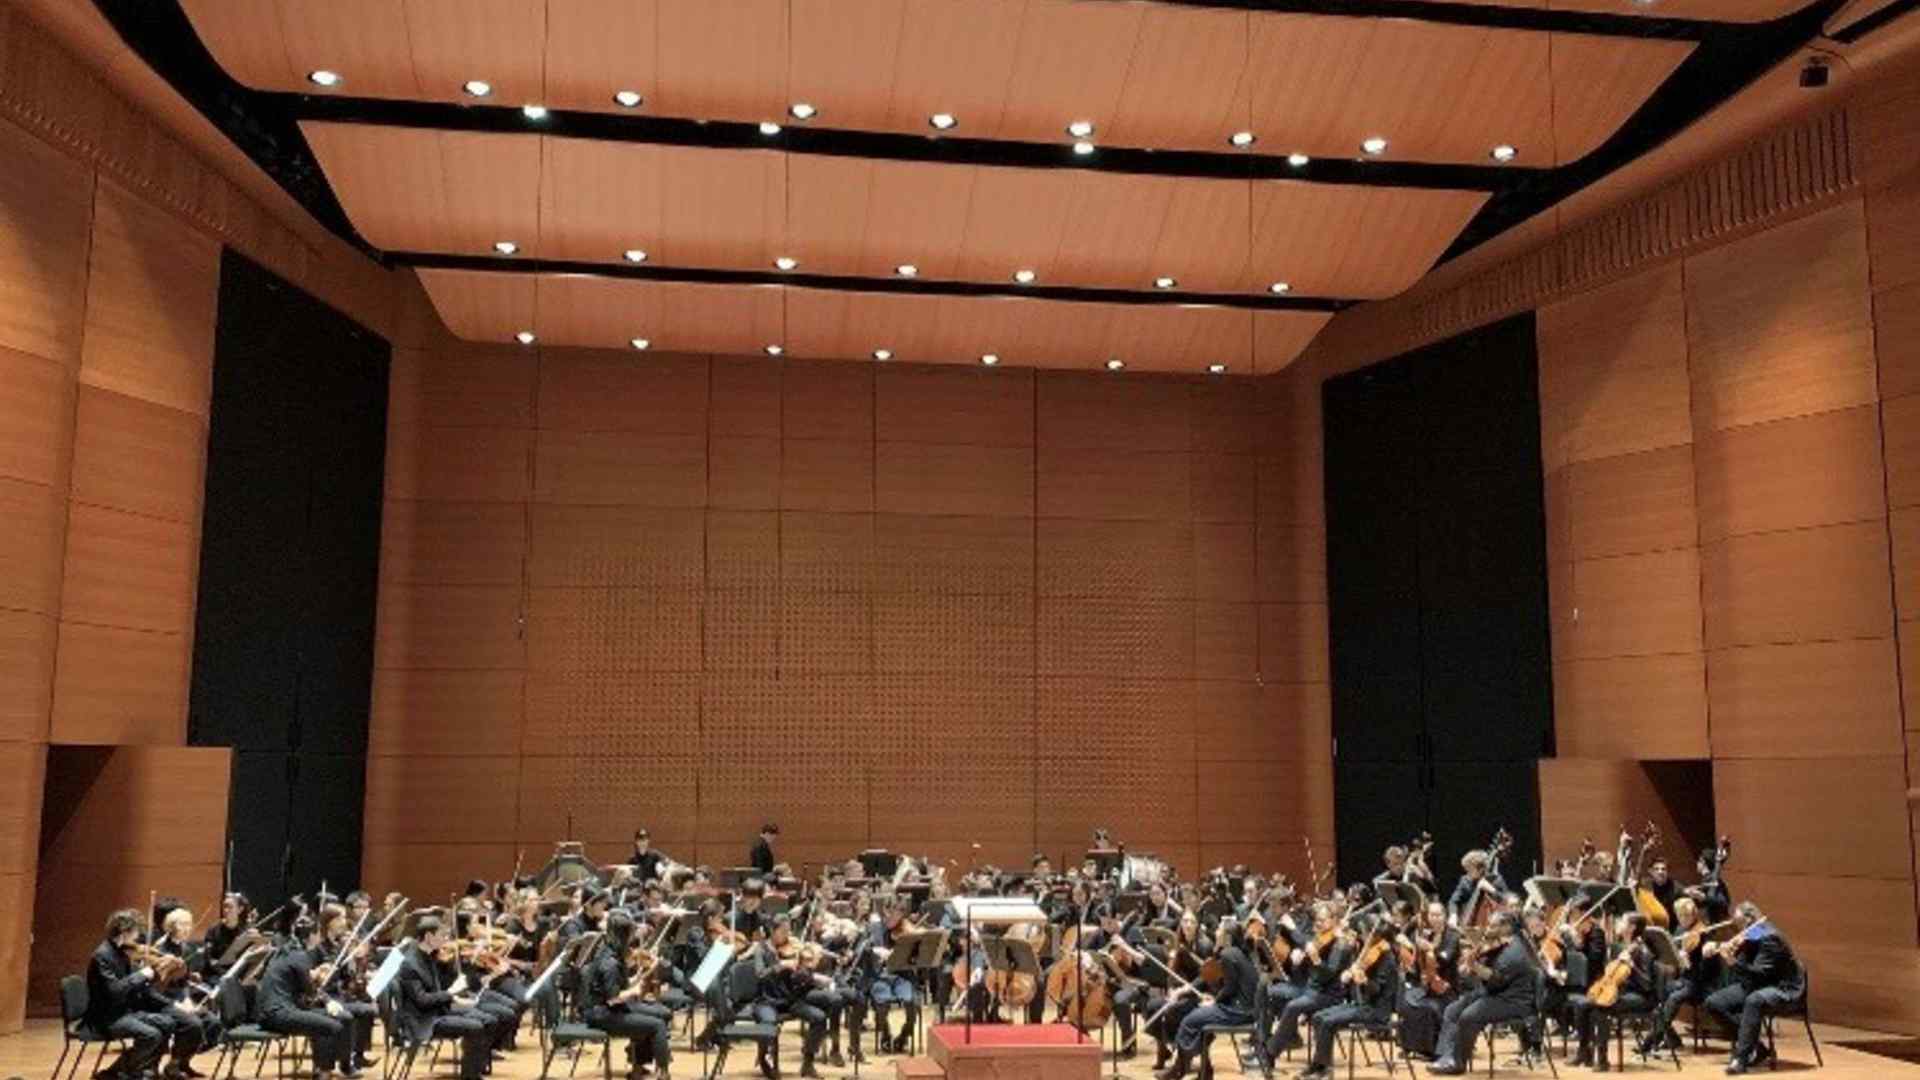 An orchestra onstage